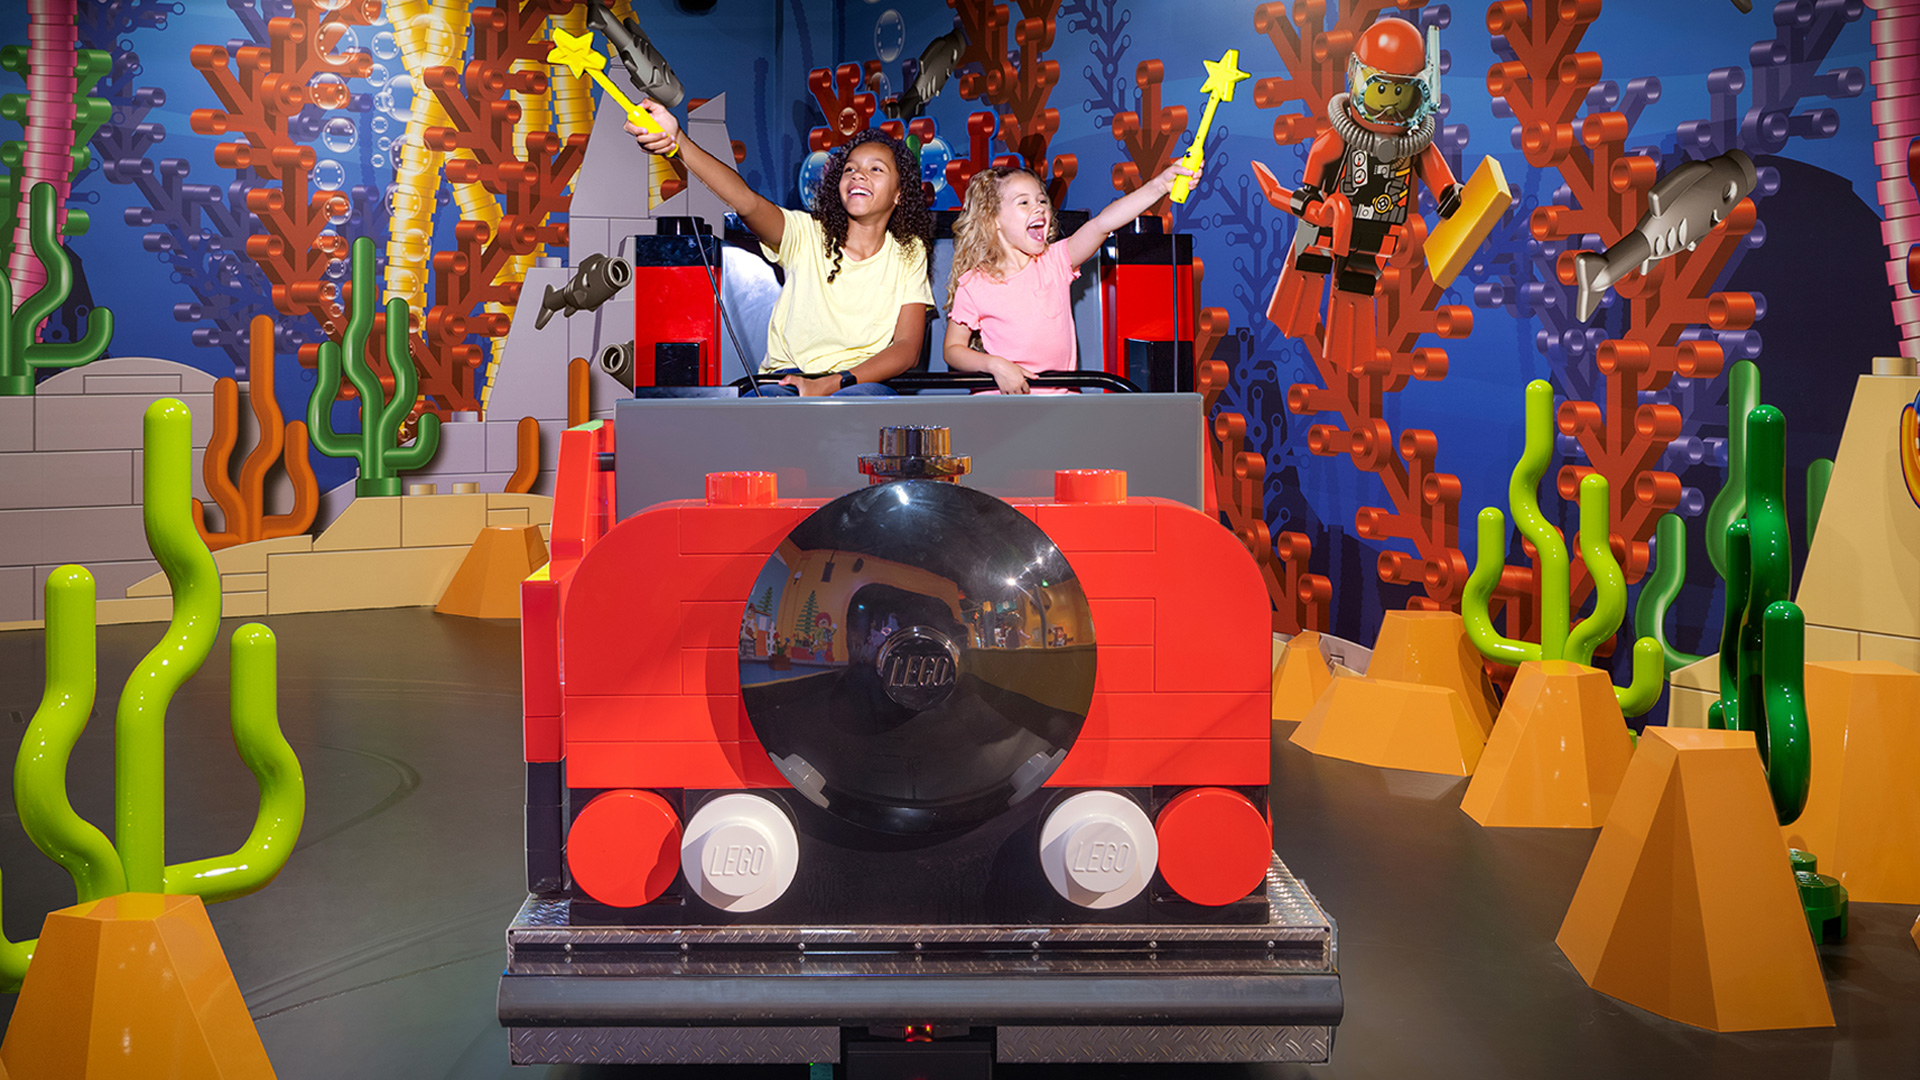 LEGO Discovery Center Washington, D.C. Announces Opening Date